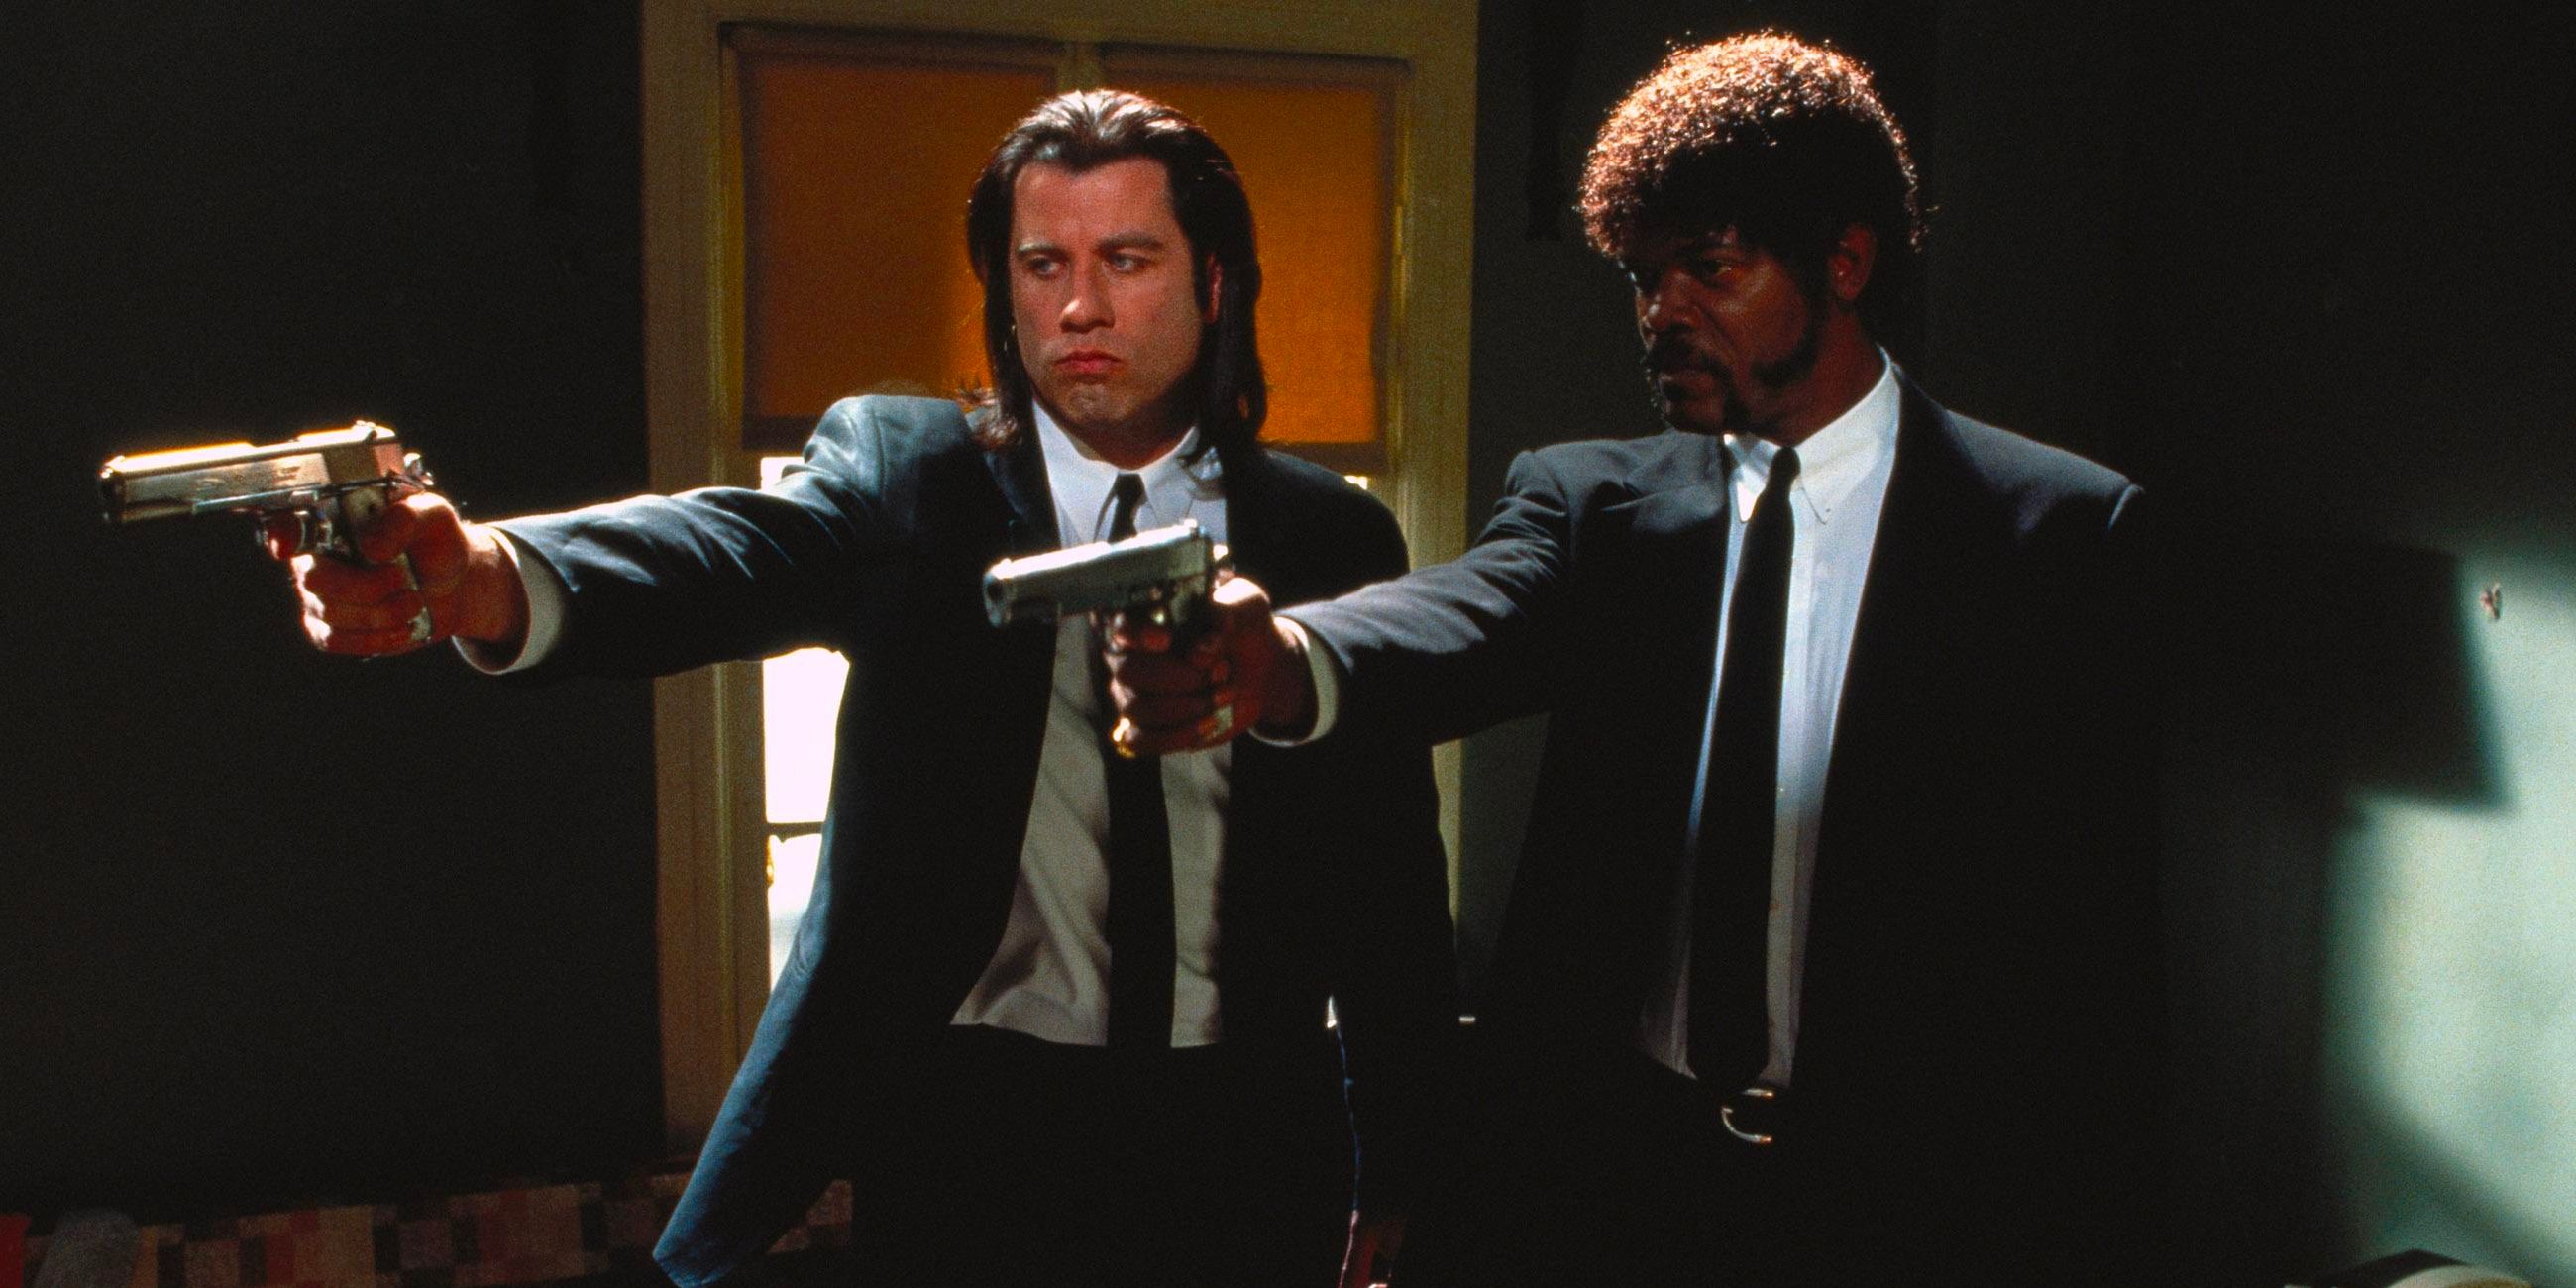 Hitmen Vincent Vega and Jules Winnfield shoot someone in an L.A. apartment building.